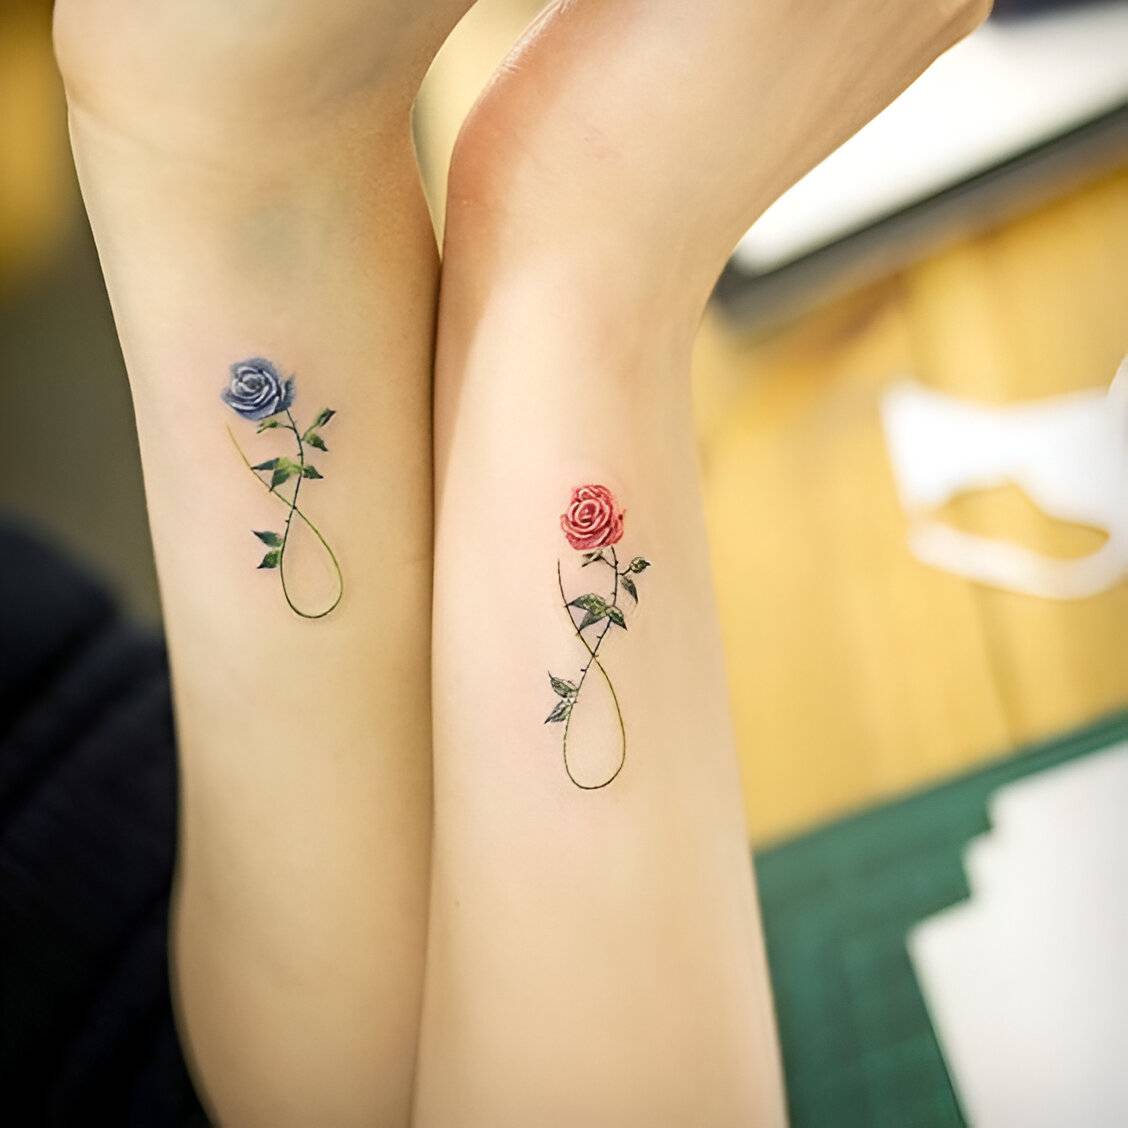 27 Feminine Best Friend Tattoos With The Perfect Elegant Touch 19